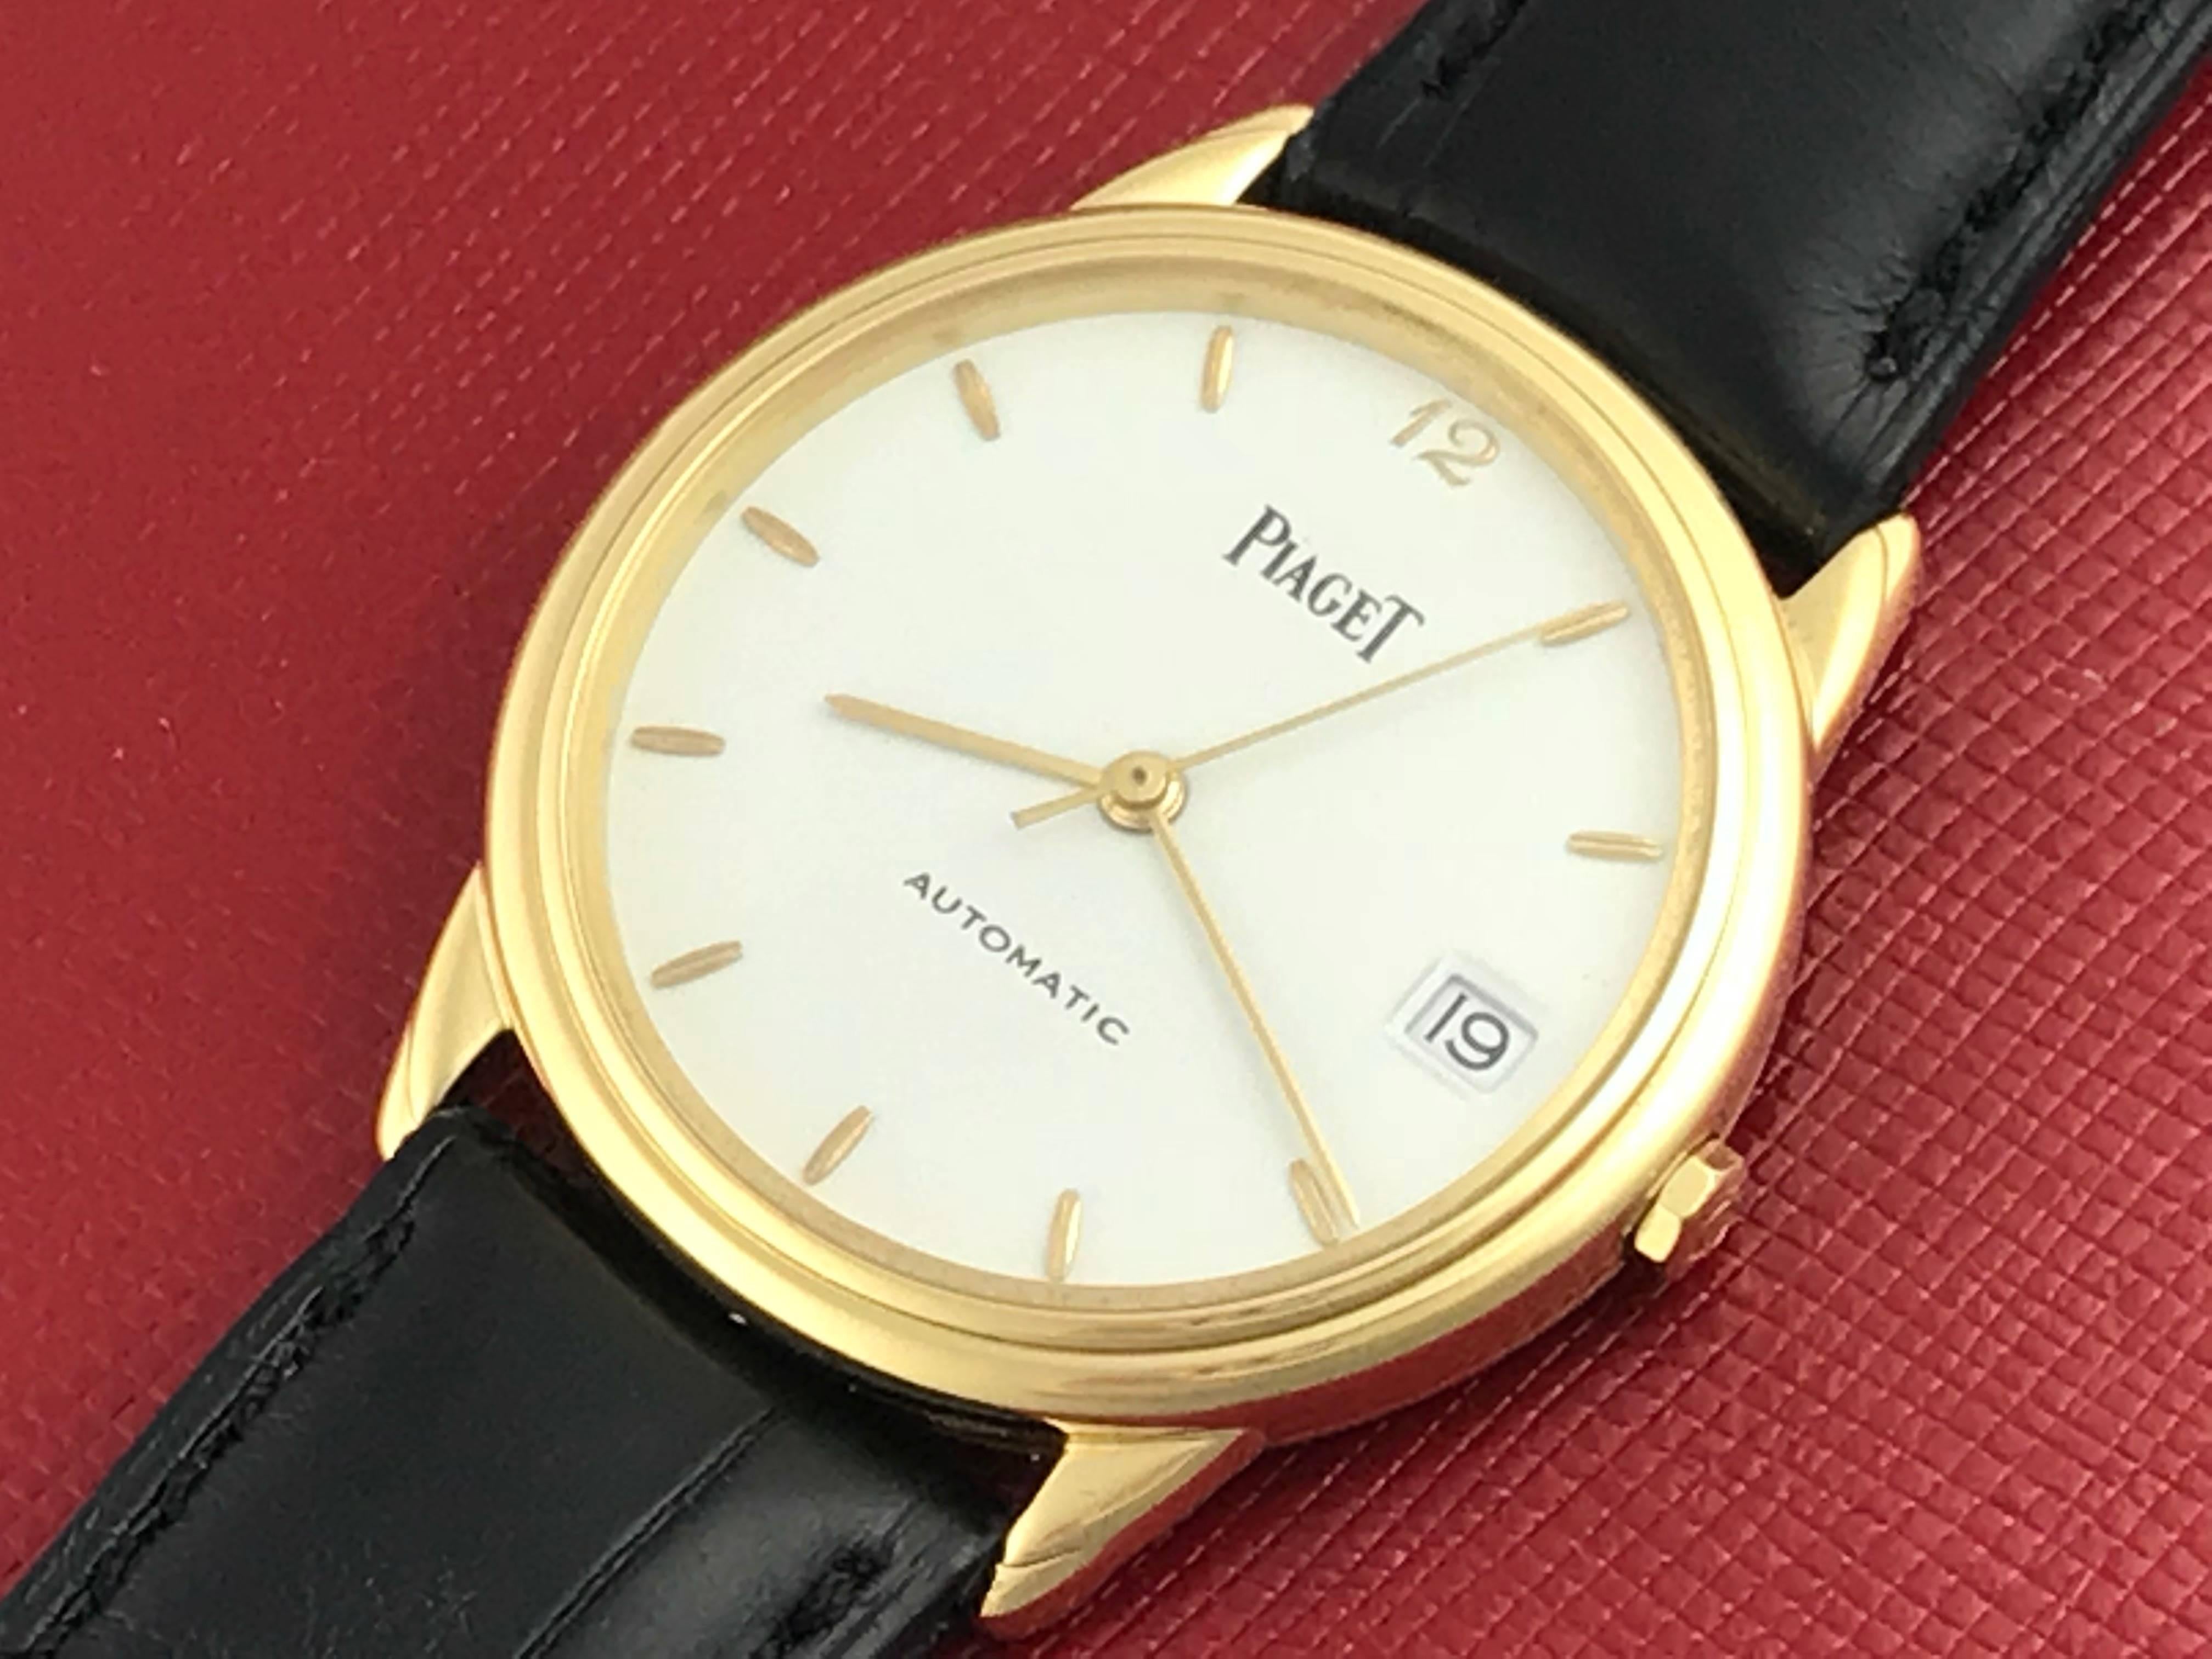 Piaget Mens 18k yellow gold automatic strap wrist watch. 18k Yellow Gold round style case (34mm dia.), Dark brown alligator strap with yellow gold filled buckle,  White Dial with yellow gold hour markers. Certified Pre Owned and ready to